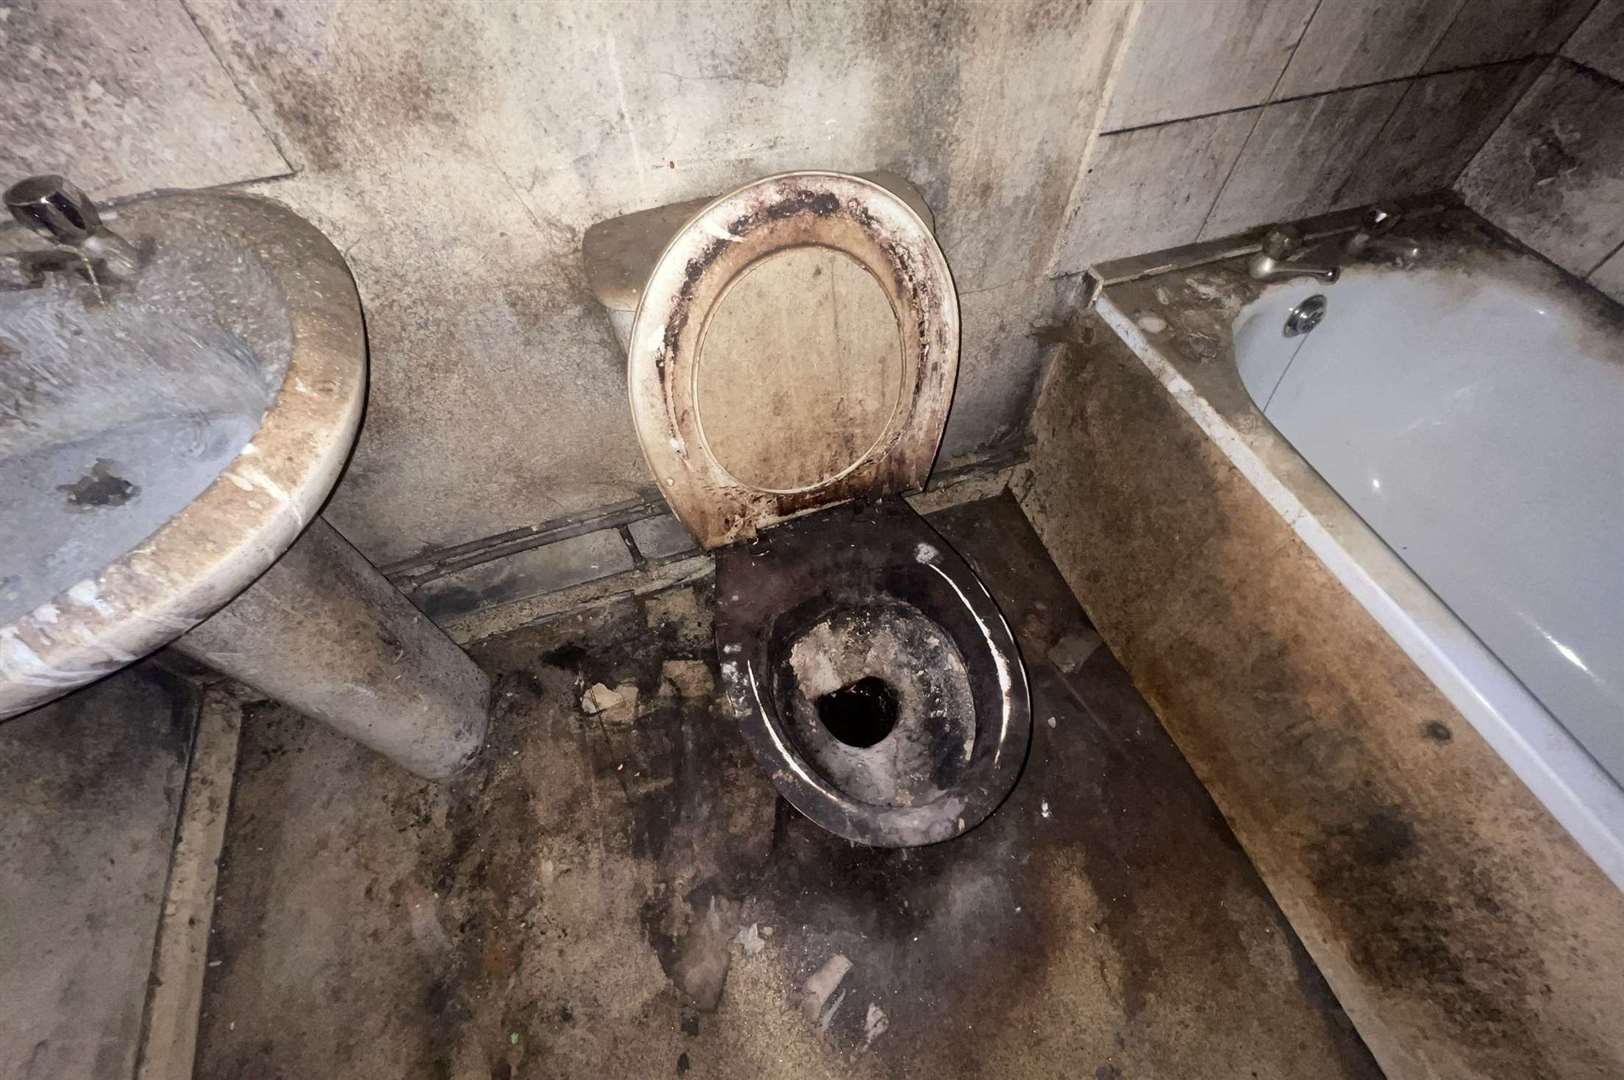 Blackened bathroom inside a filthy property before it received it's first deep clean in twenty years by cleaner couple from Ashford James Kilburn and Kimberley. Photo: SWNS